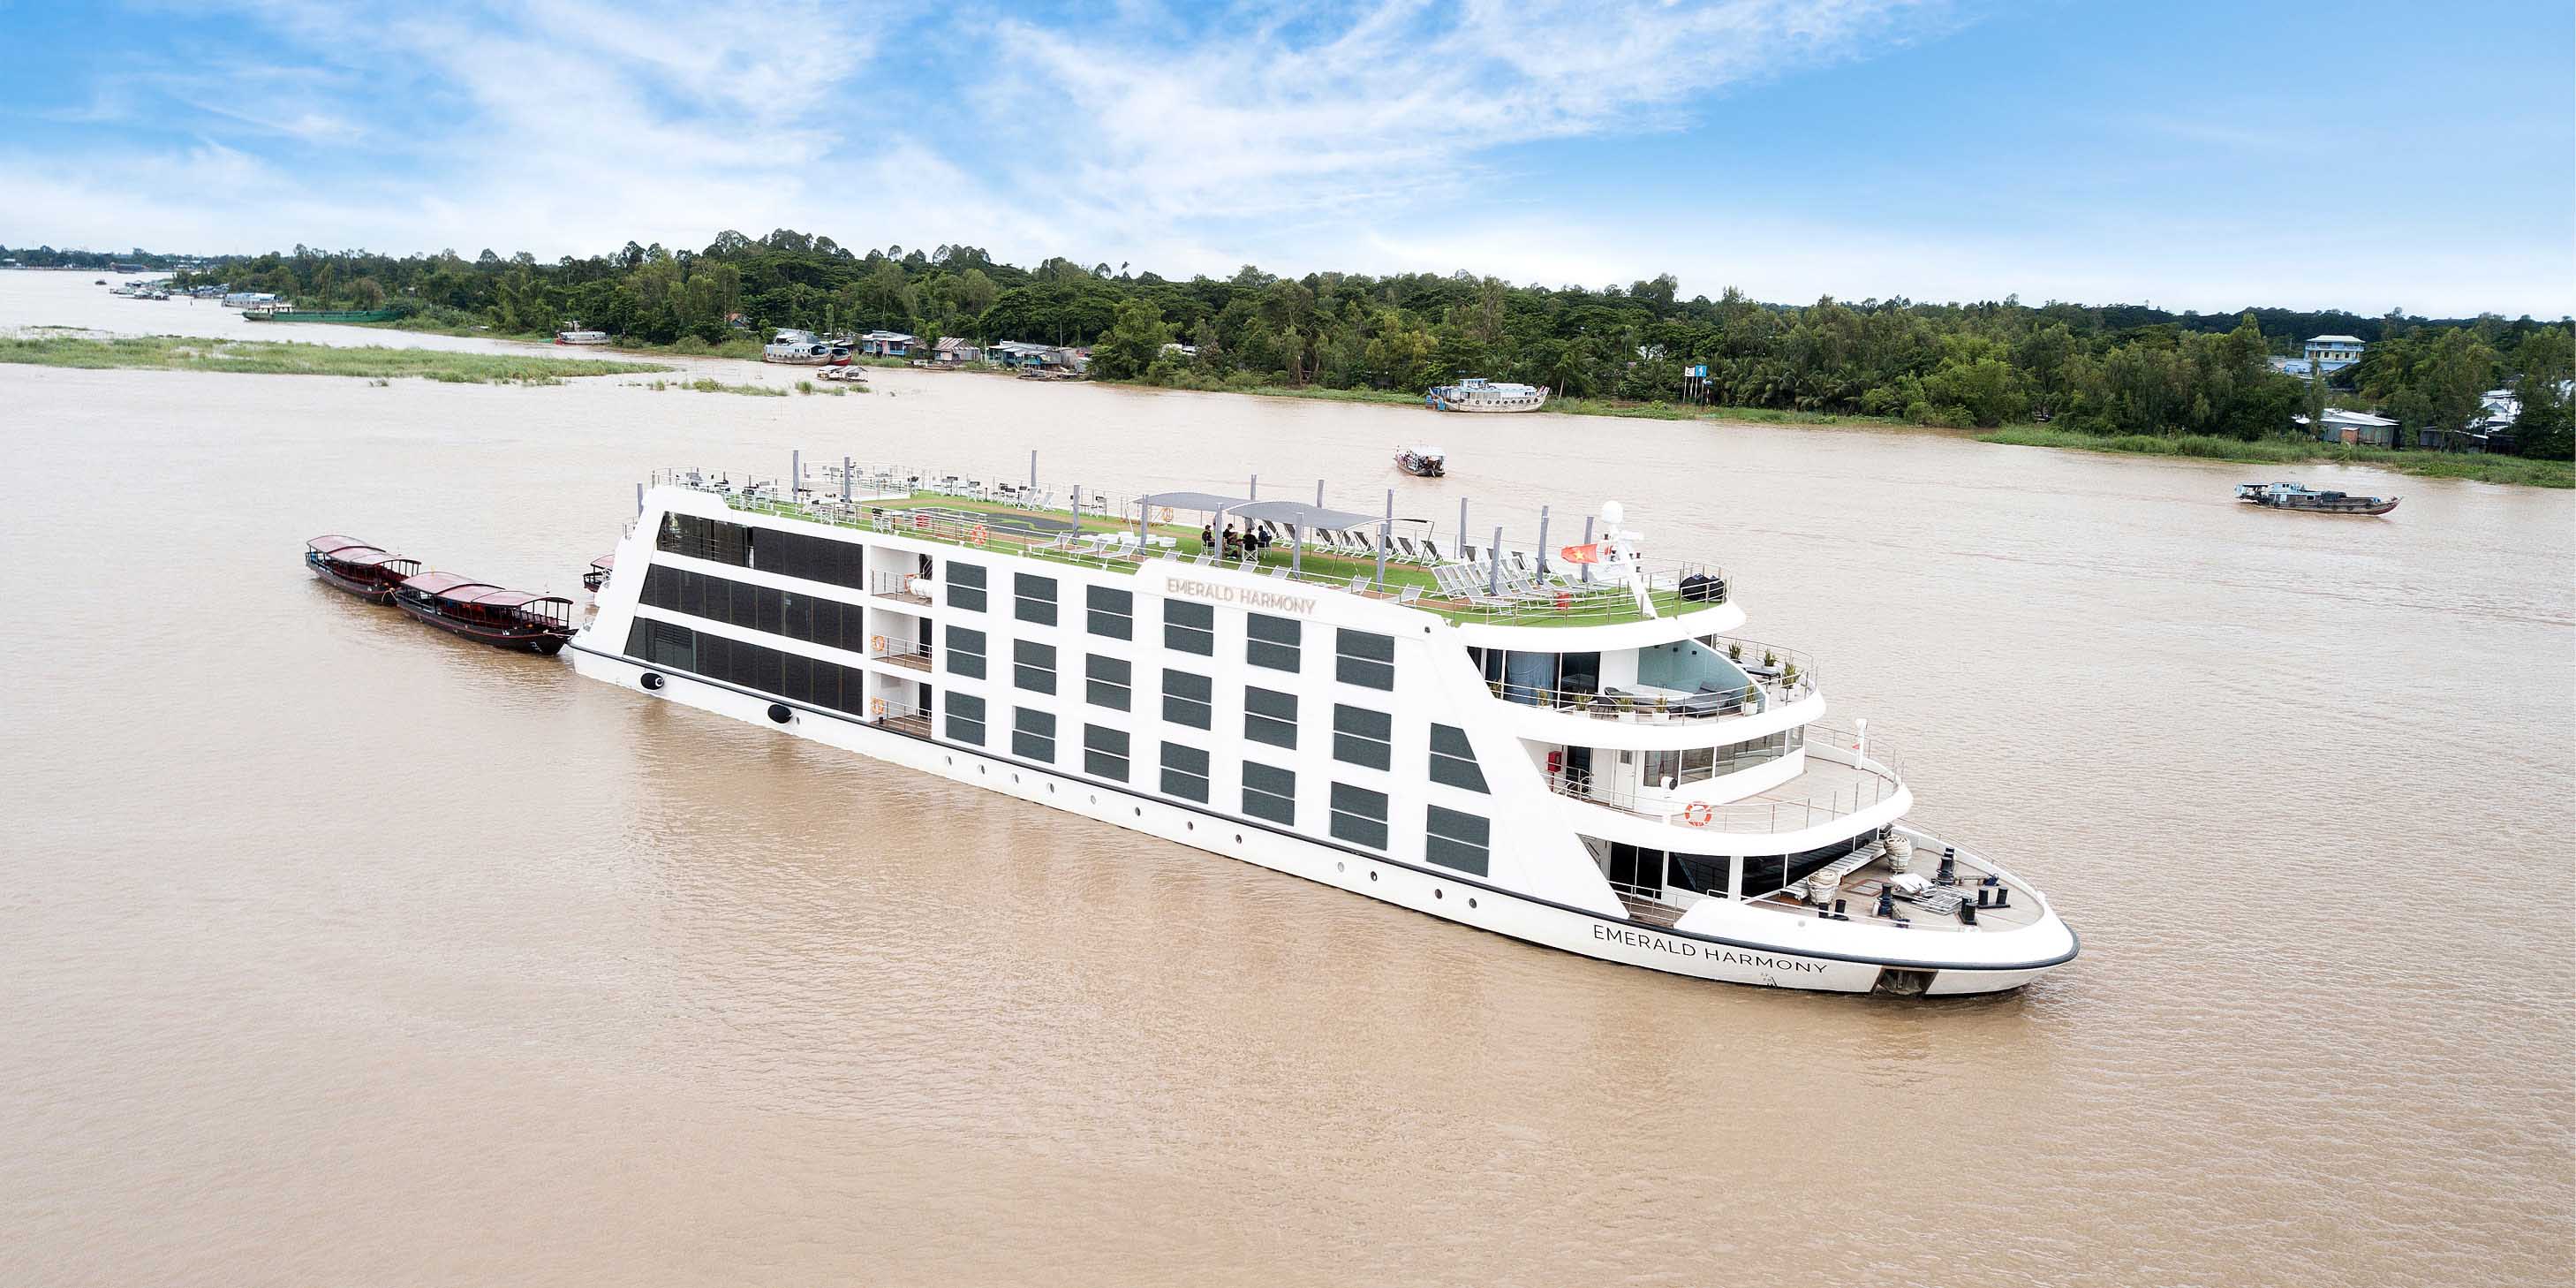 Emerald Harmony cruising along the Mekong River, with the trees along the banks and a blue cloudy sky above